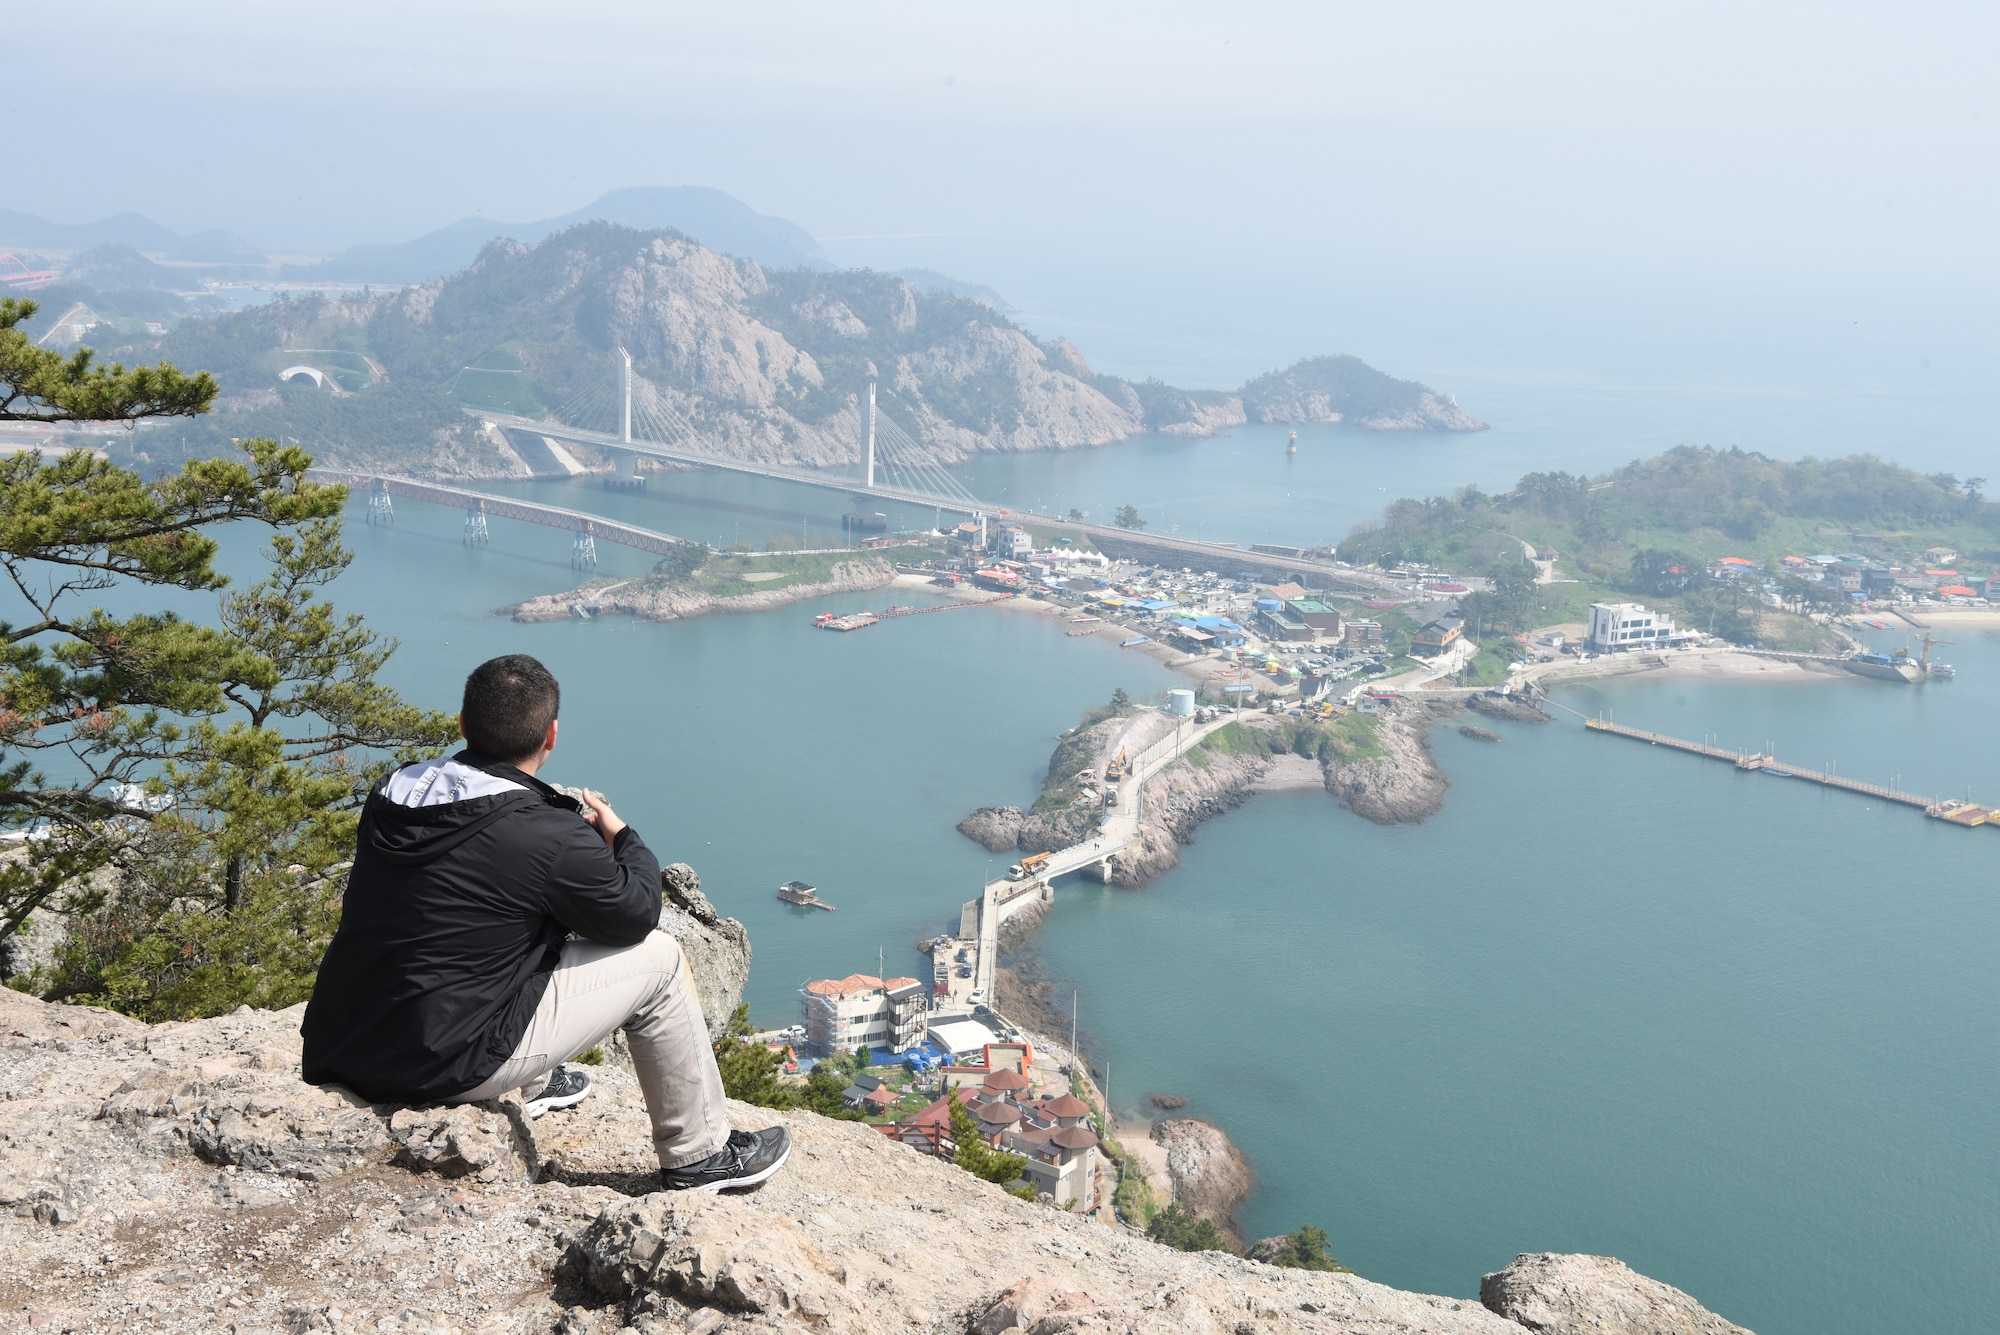 U.S. Air Force Senior Airman Stefan Alvarez, 8th Fighter Wing Public Affairs photojournalist, views Gogunsan Islands during a tour of Gunsan city April 30, 2019. The tour exposed Airmen to key landmarks in and near the city of Gunsan. The Gungunsan Islands is located 50 kilometers to the southwest of Gunsan and encompasses 63 islets.  (U.S. Air Force photo by Staff Sgt. Joshua Edwards)